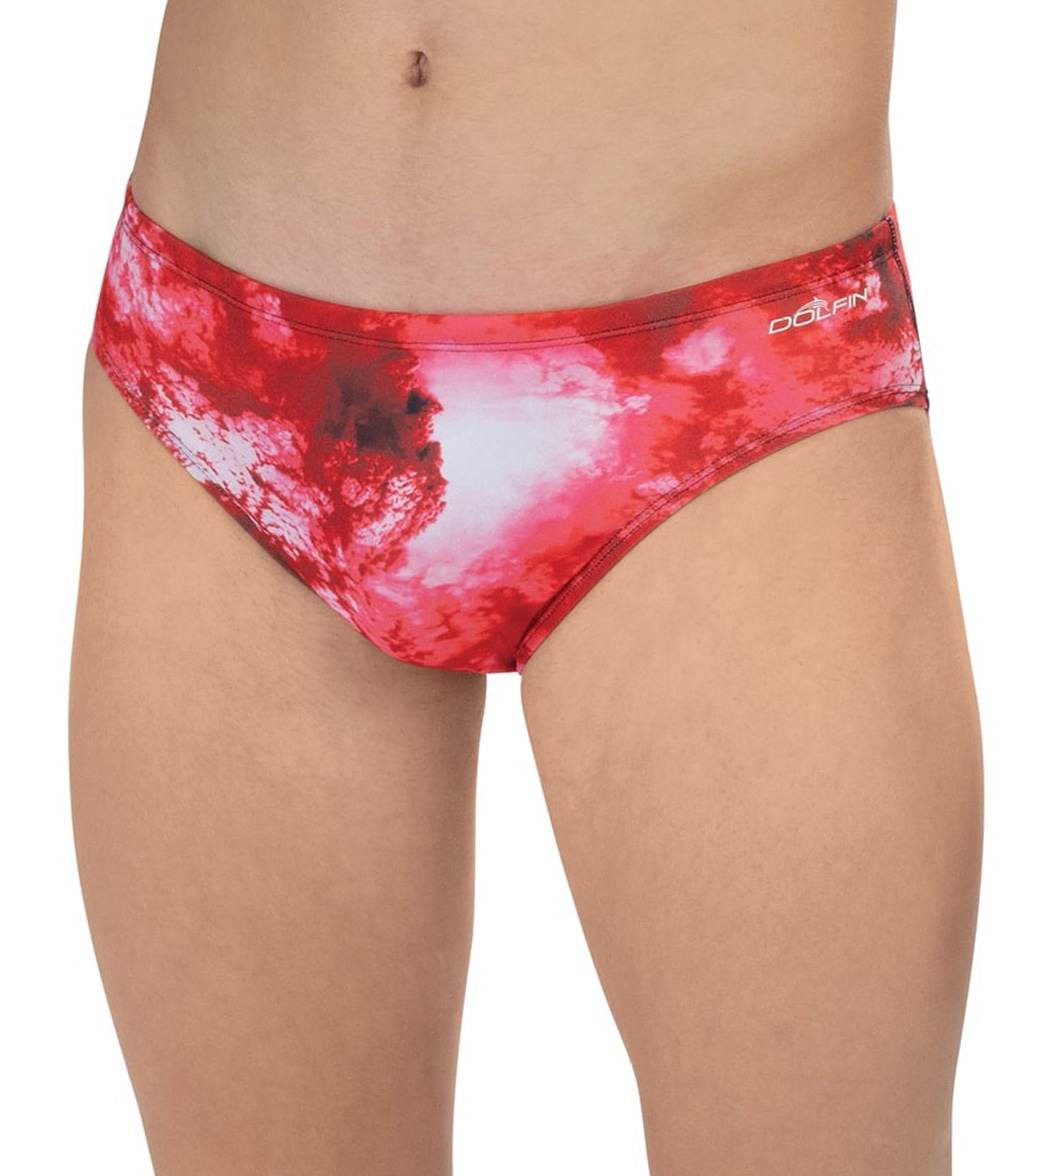 Dolfin Men's Reliance Cyclone Racer Brief Swimsuit - Red 26 Polyester - Swimoutlet.com